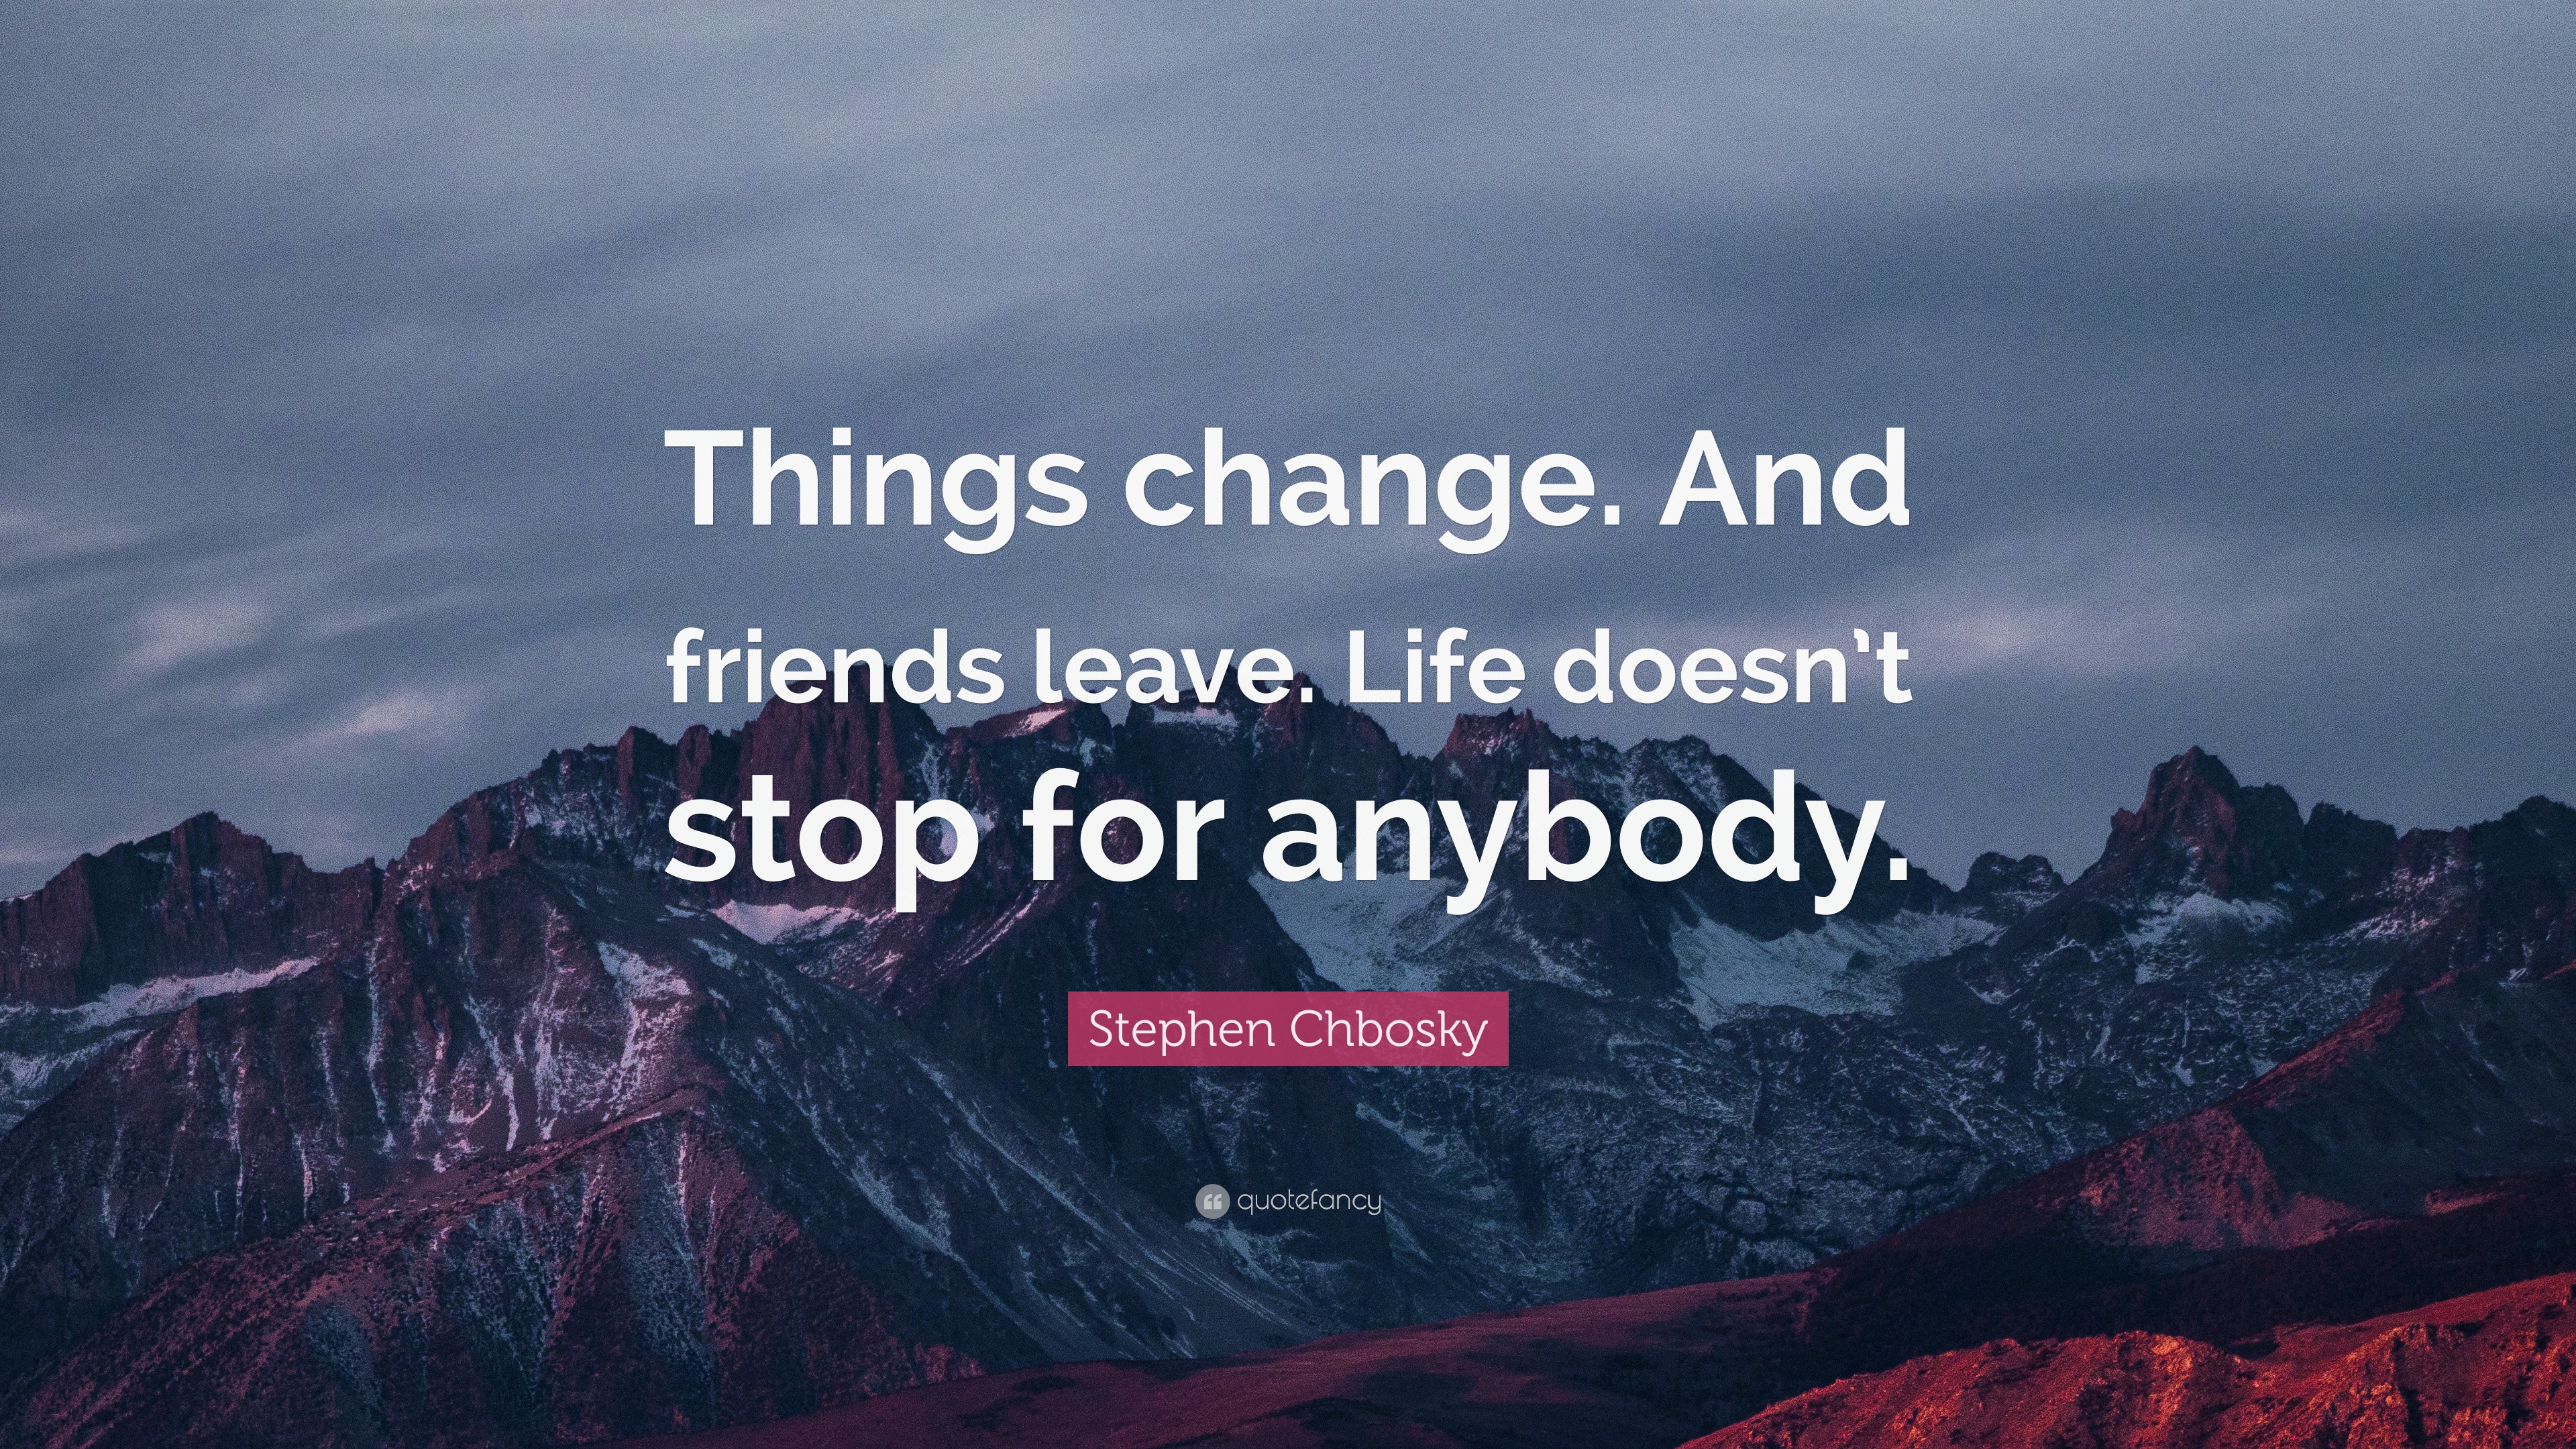 Stephen Chbosky Quote: “Things change. And friends leave. Life doesn’t